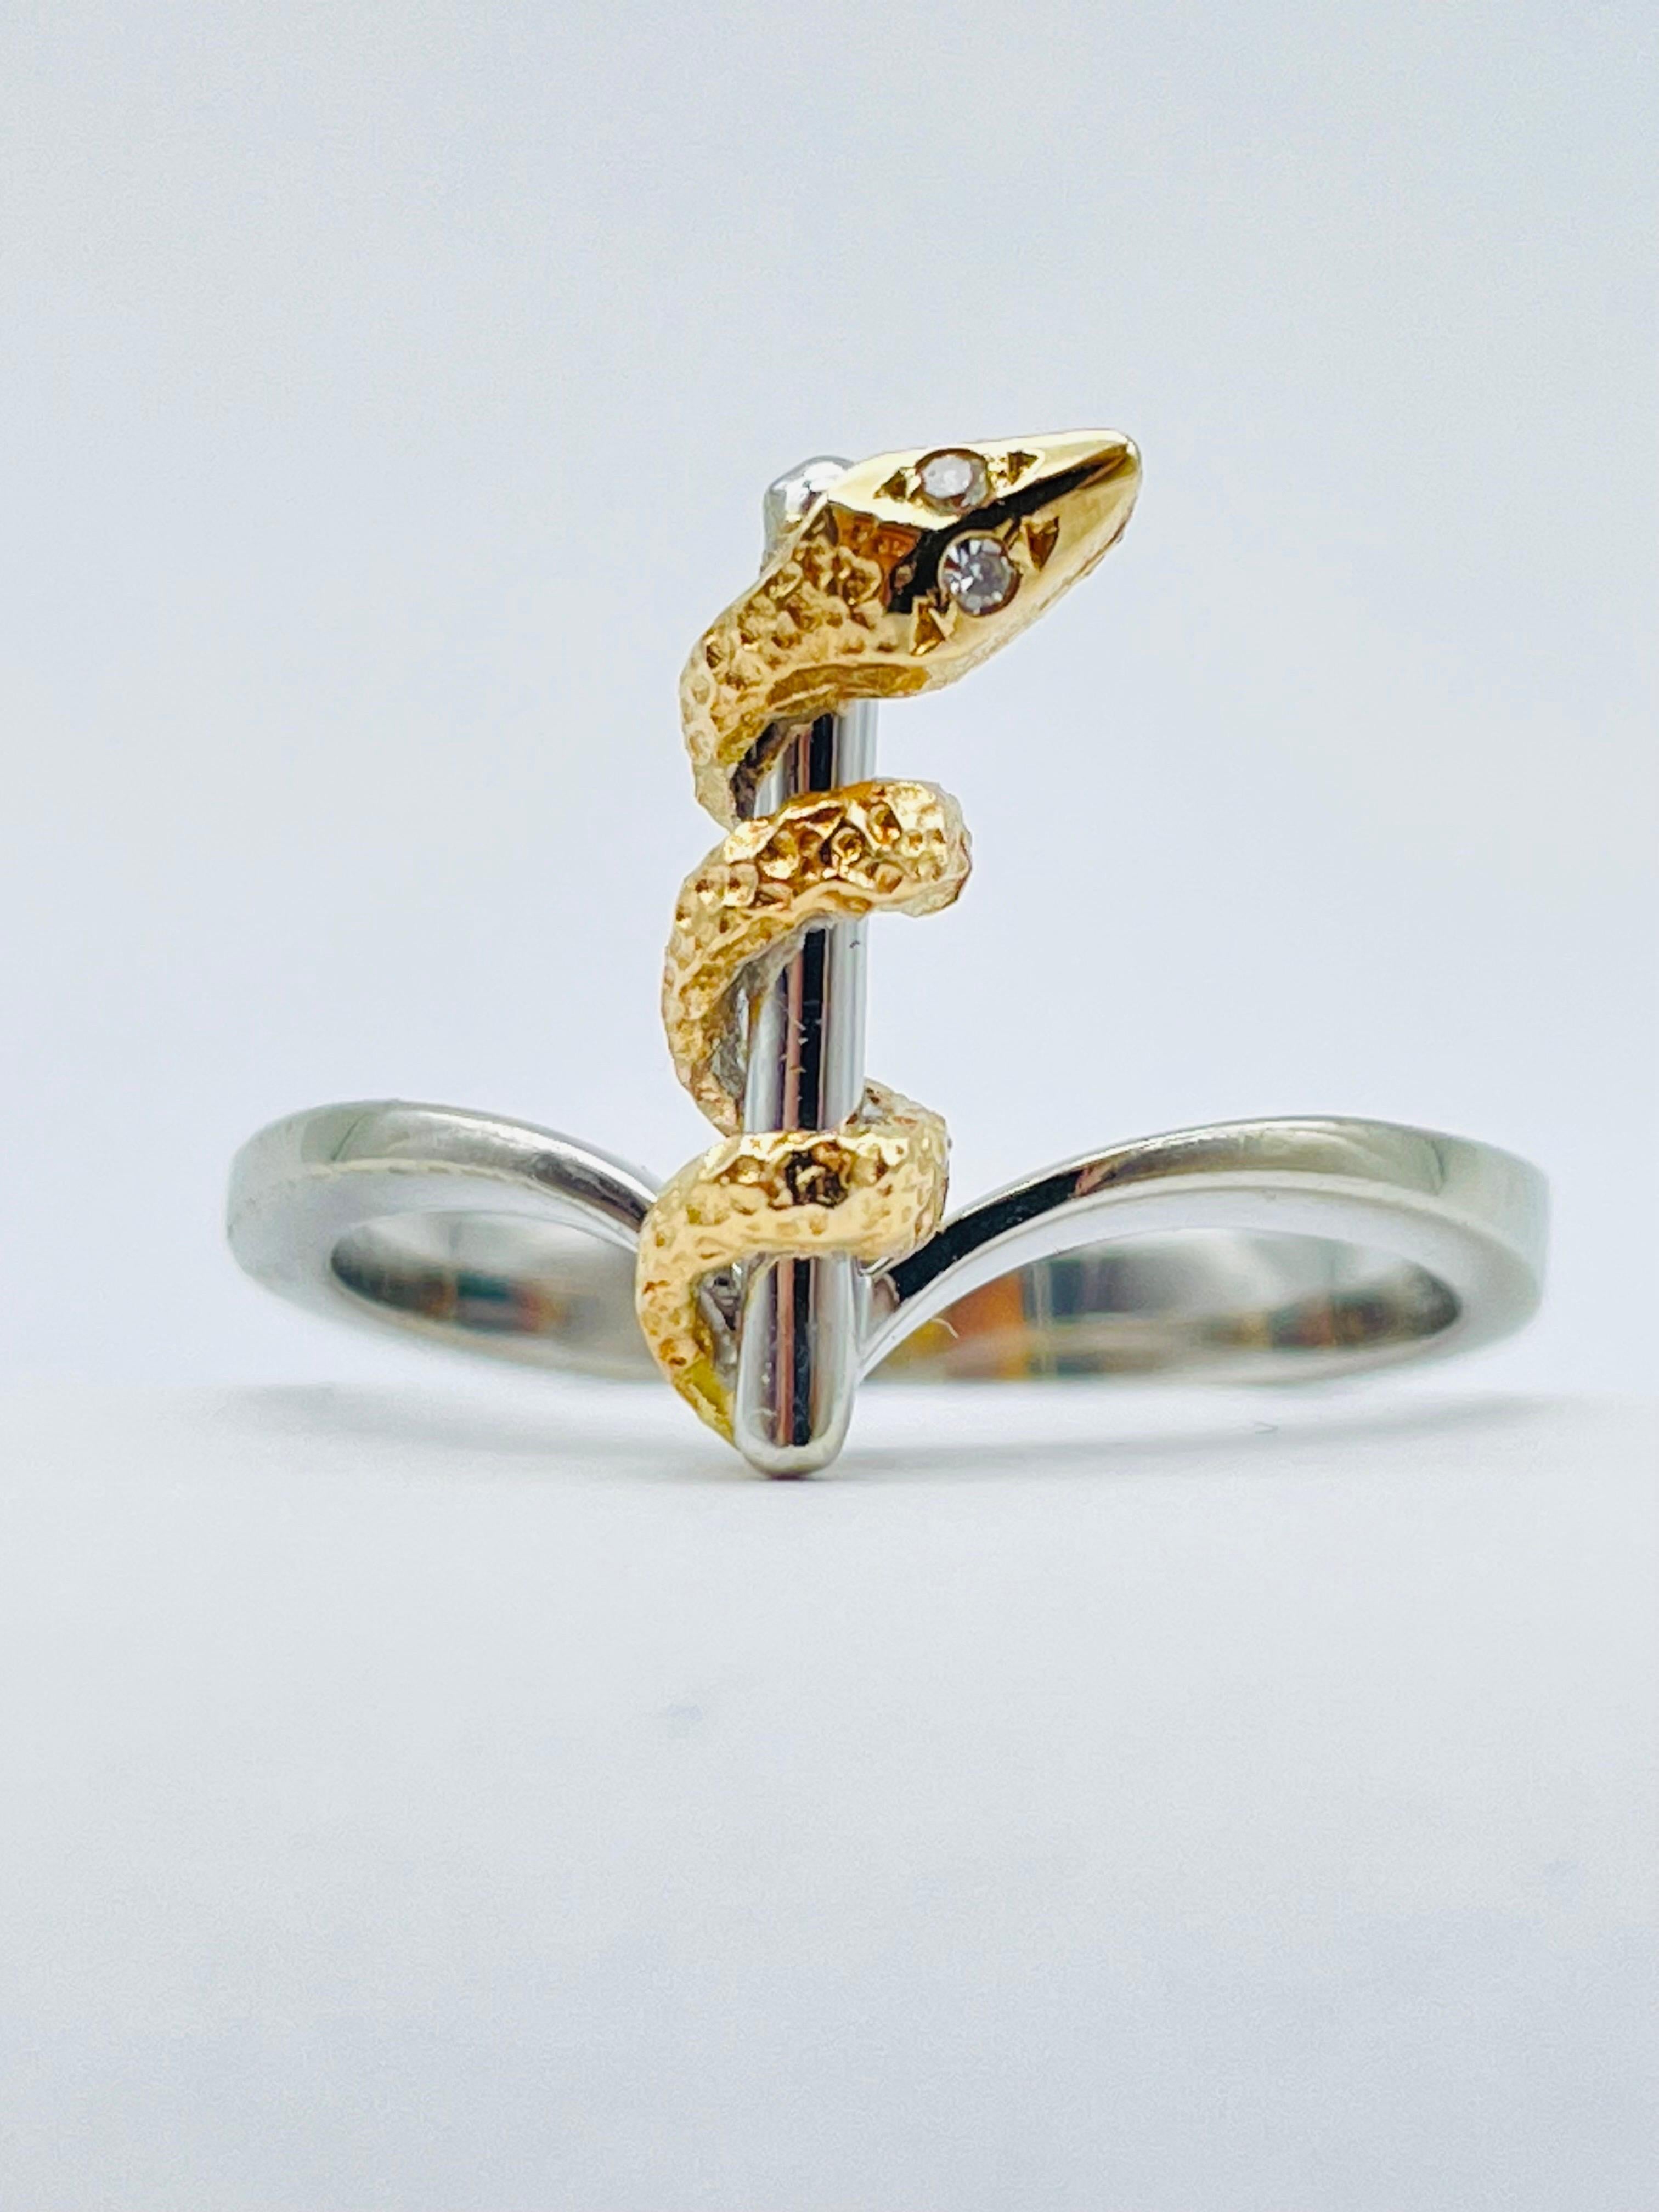 Brilliant Cut Unique and Elegant Snake Bicolor Ring with Diamond Eyes White/Yellow Gold 14k For Sale